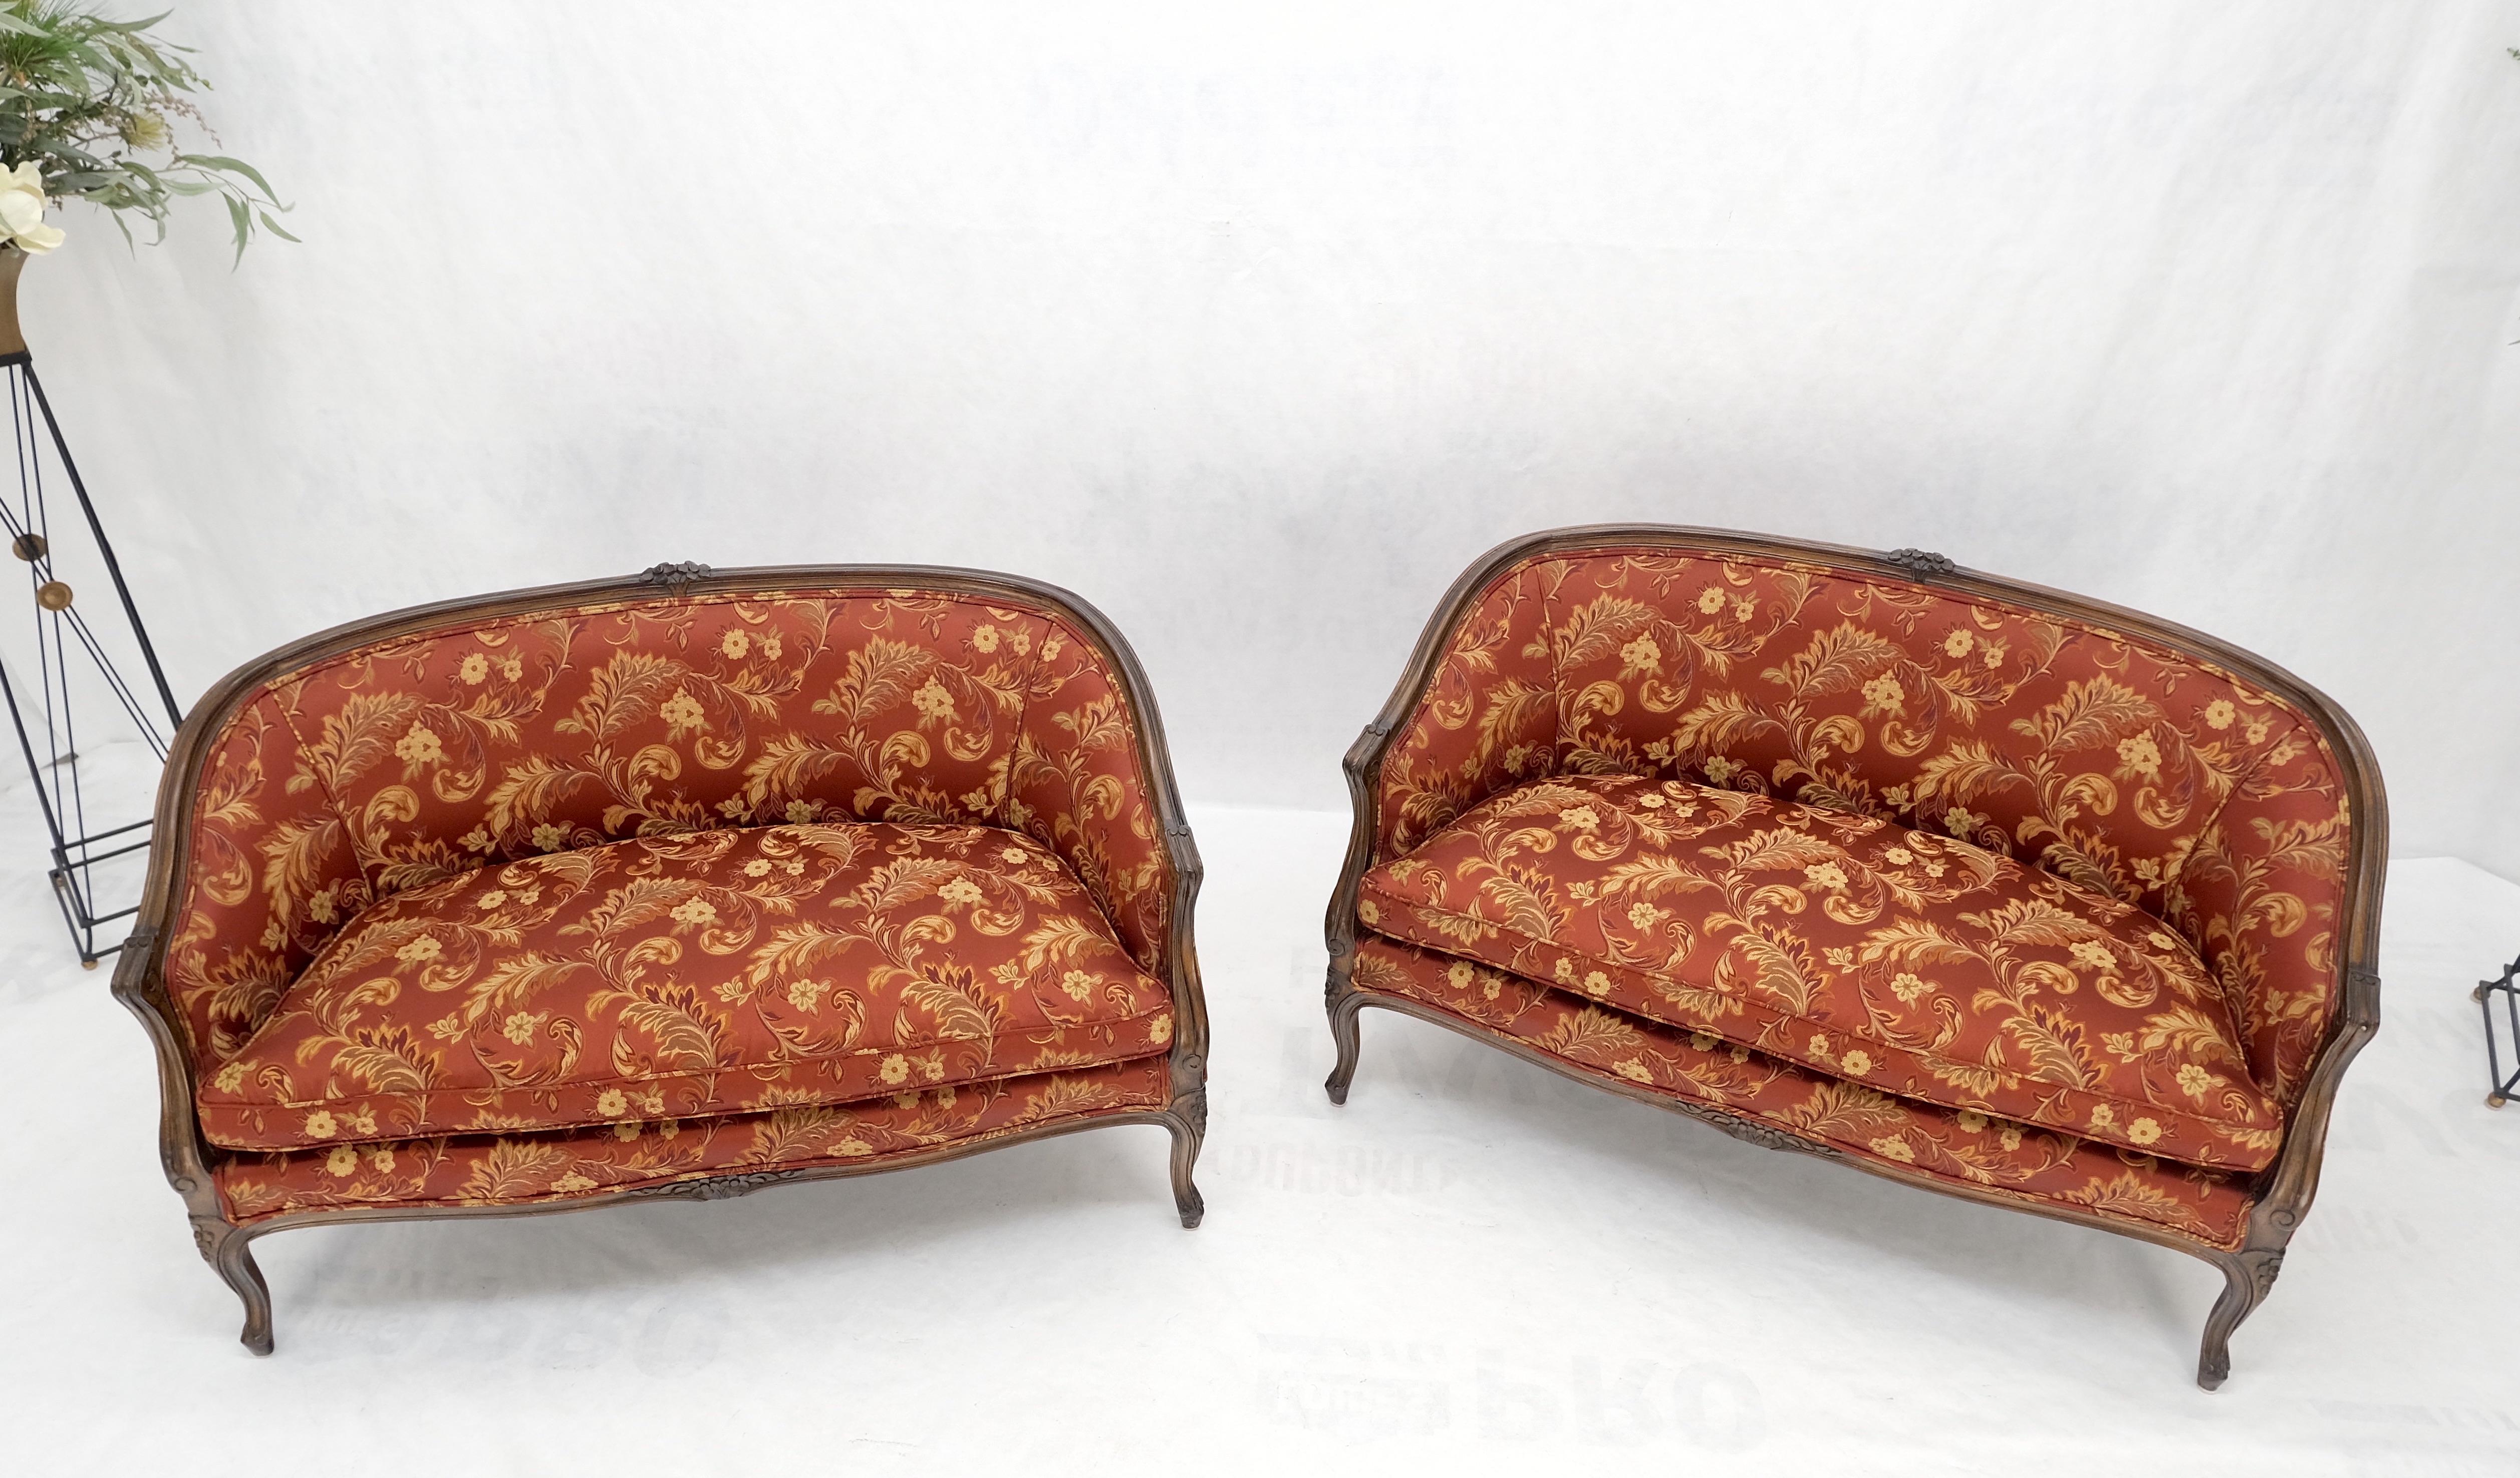 Pair of mint condition carved walnut country french down cushions compact sofas.